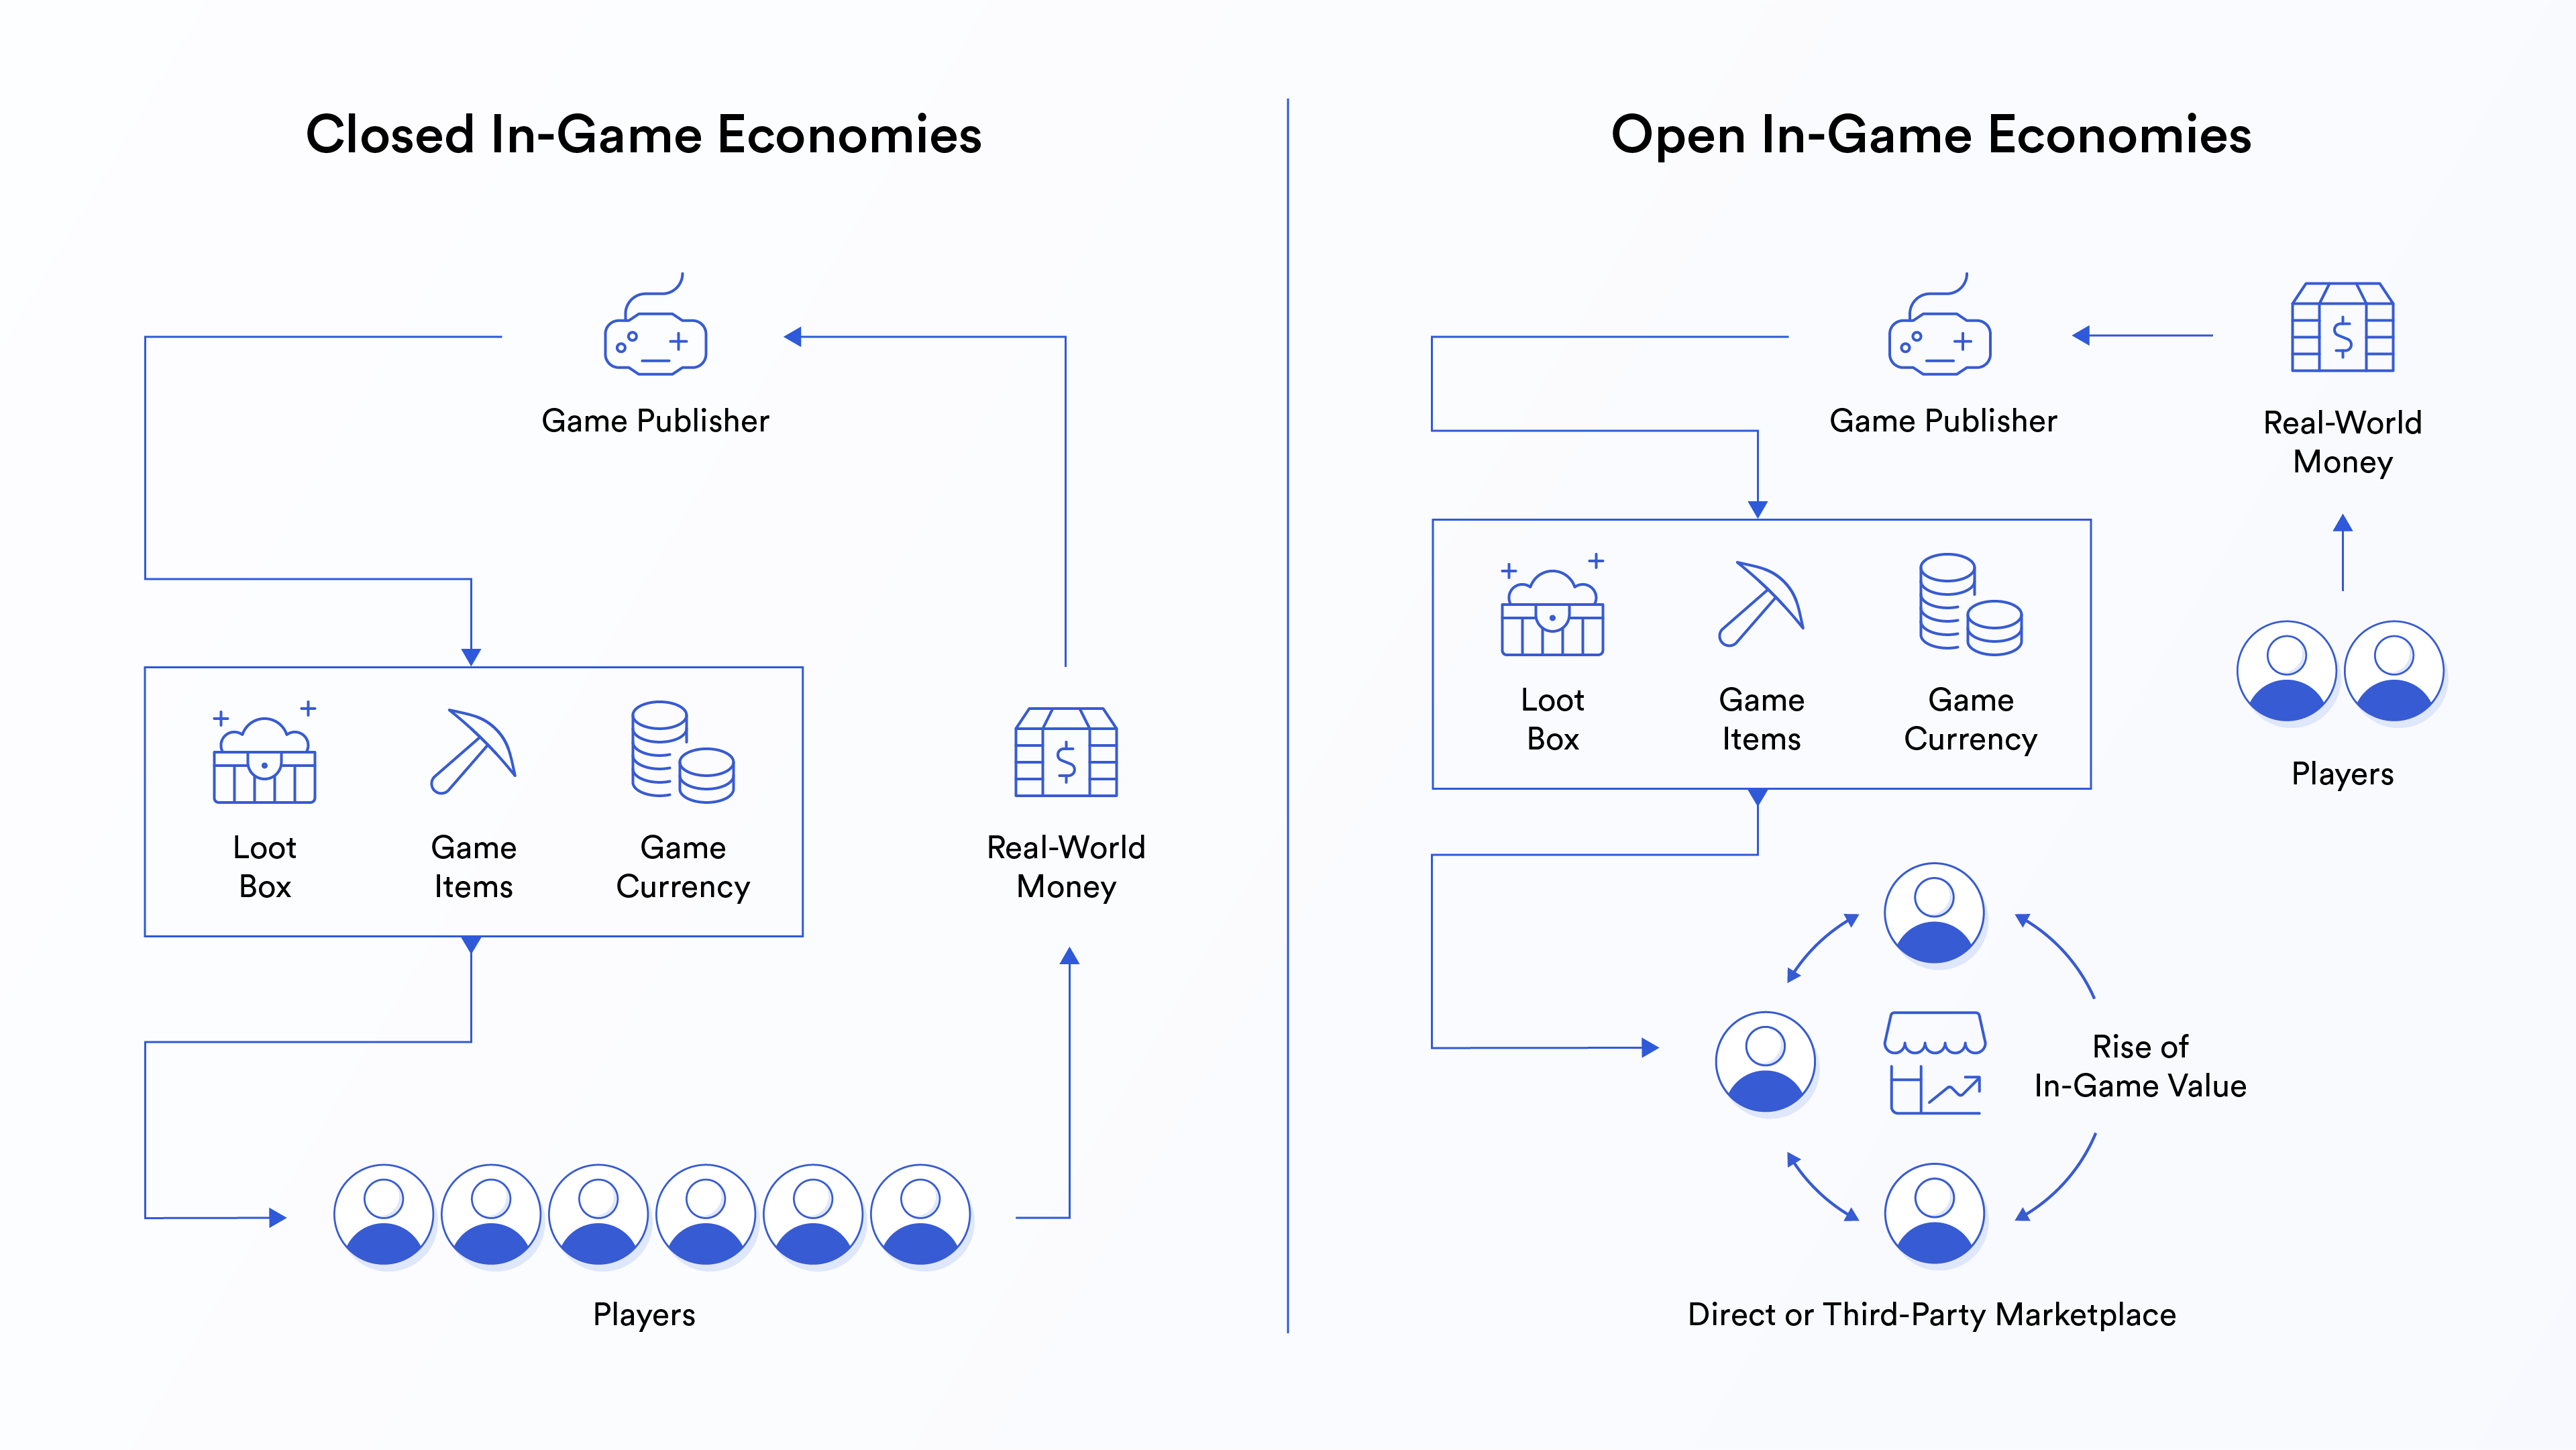 A diagram showing how open in-game economies allow for third-party marketplaces and the rise of in-game value. 